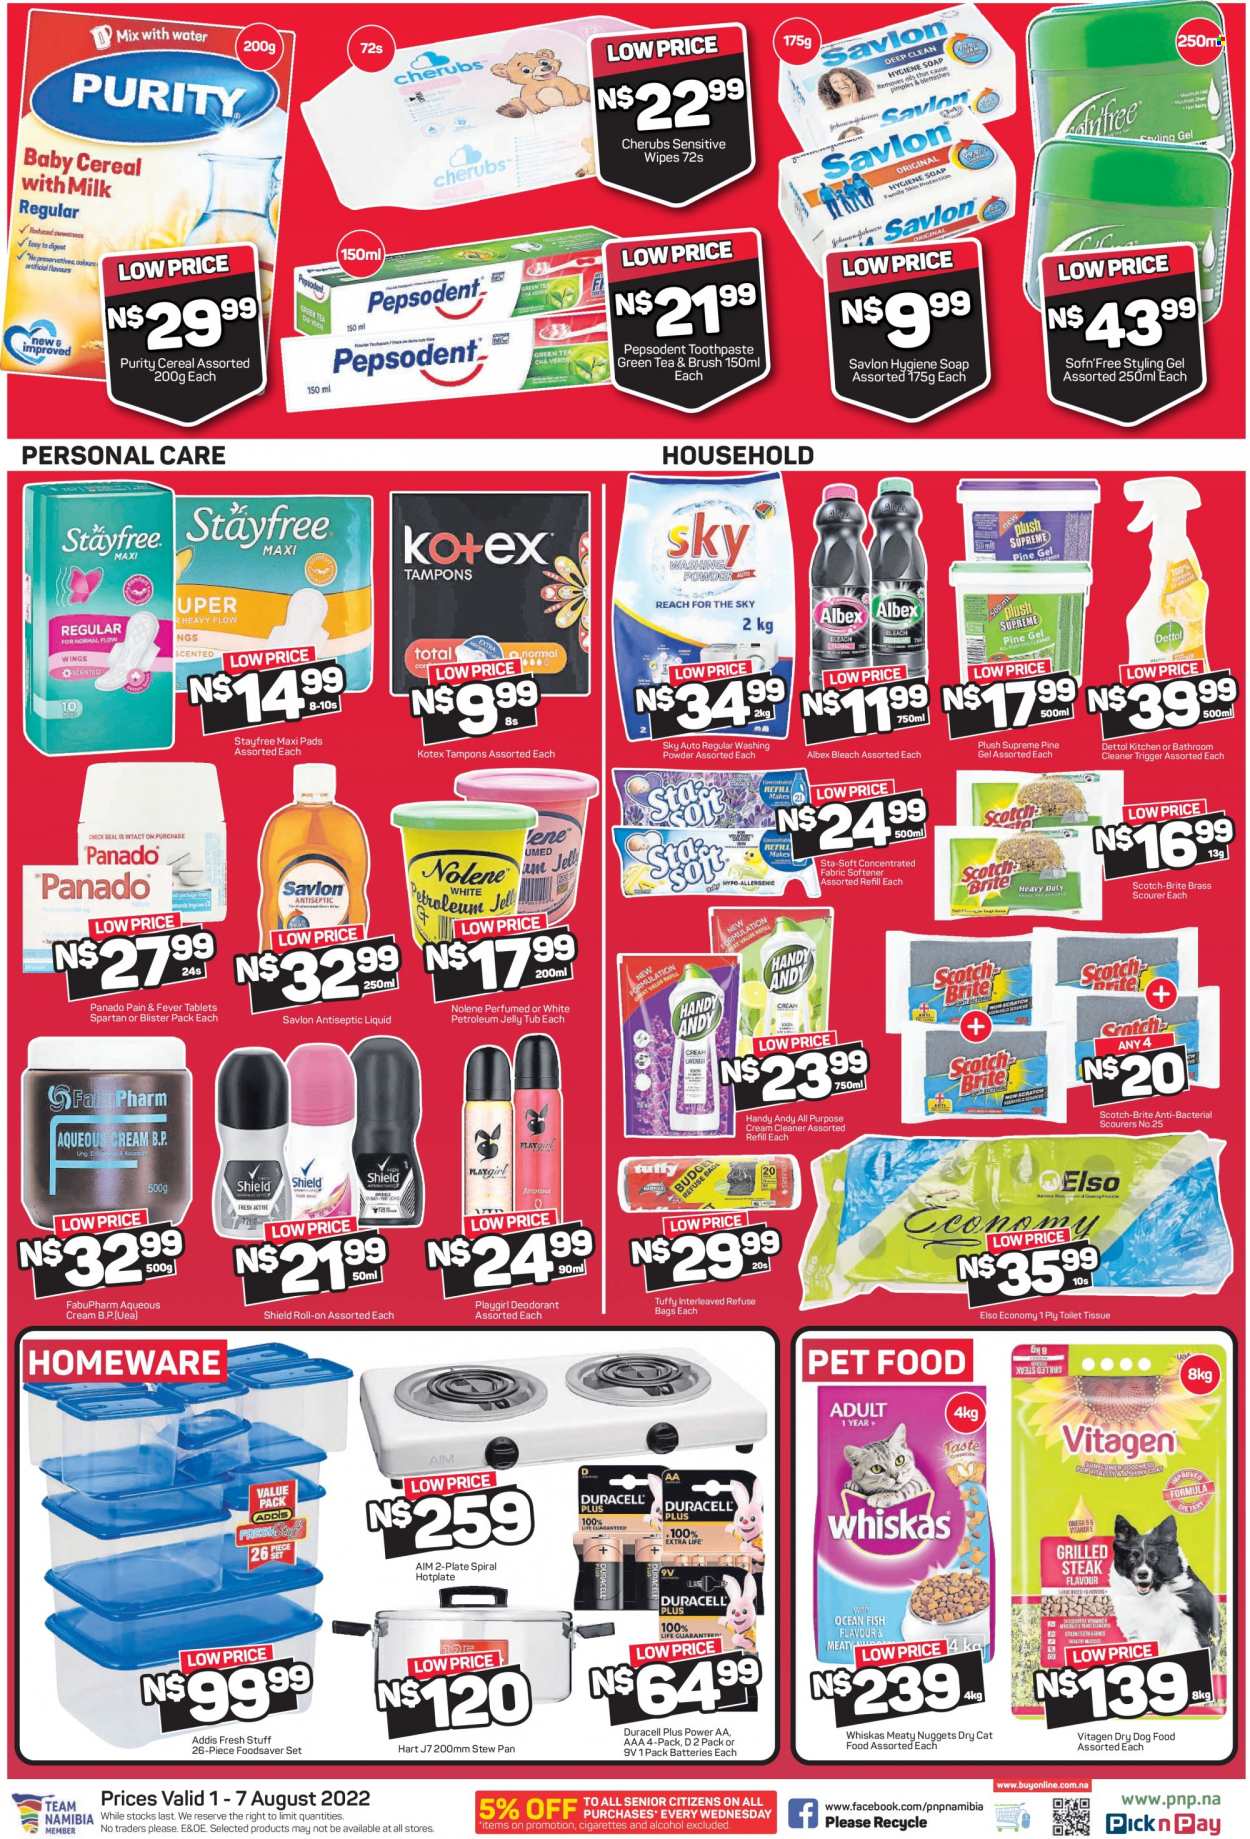 Pick n Pay catalogue  - 01/08/2022 - 07/08/2022 - Sales products - cereals, green tea, alcohol, Purity, wipes, Dettol, cream cleaner, bleach, cleaner, fabric softener, laundry powder, scourer, soap, toothpaste, Pepsodent, Stayfree, sanitary pads, Kotex, tampons, petroleum jelly, styling gel, Brite, battery, Duracell, animal food, cat food, dog food, Whiskas, dry dog food, dry cat food. Page 4.